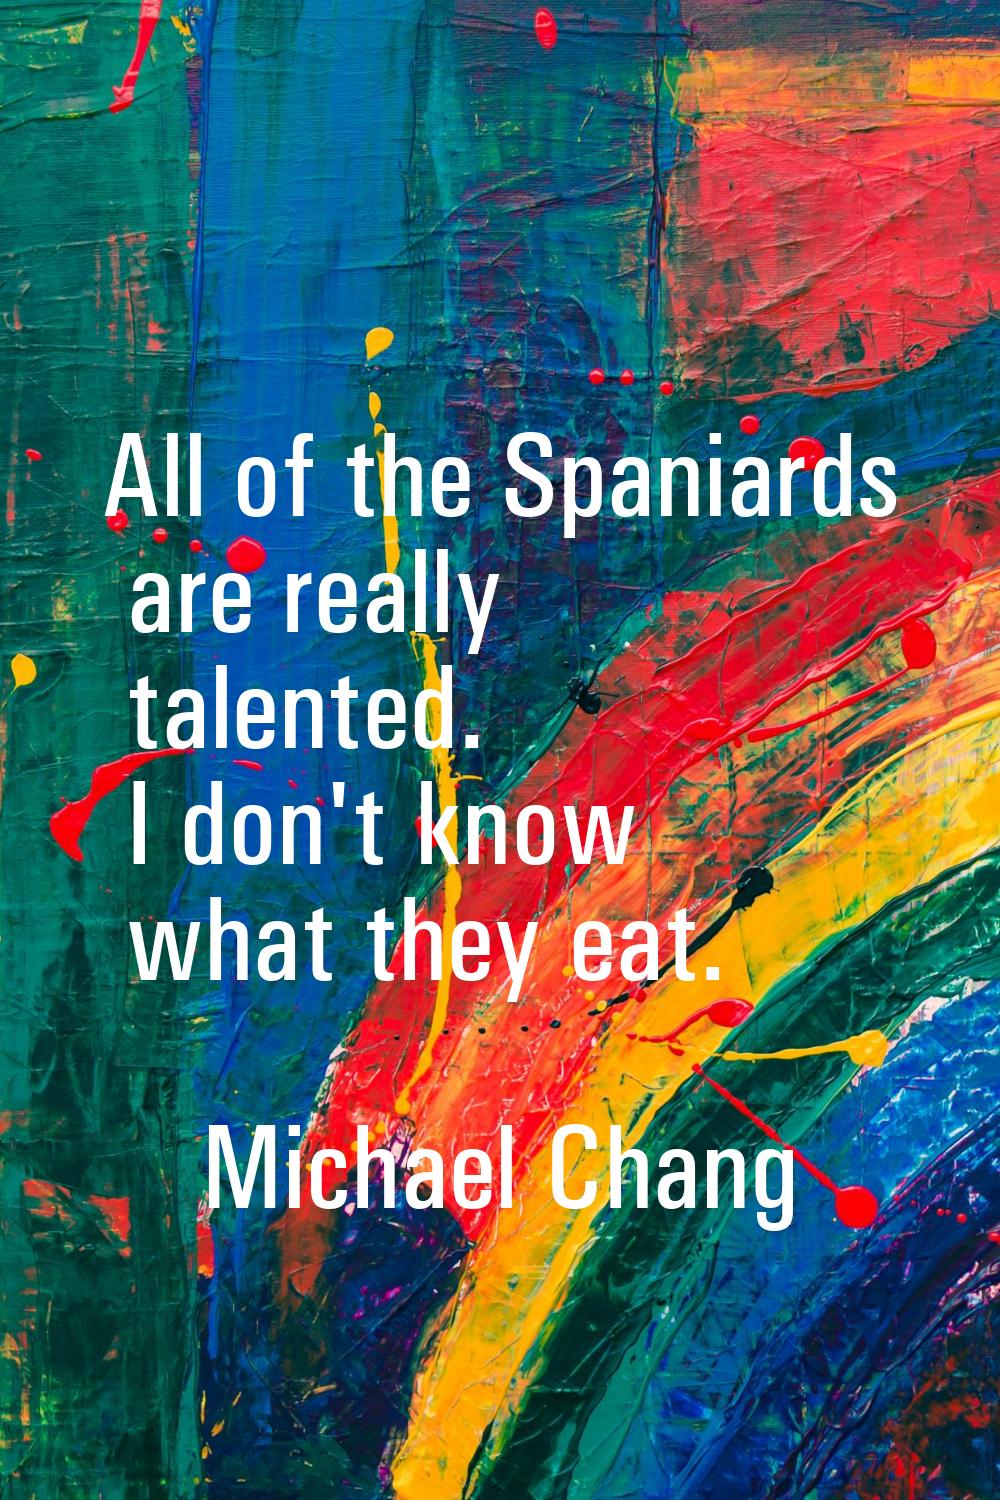 All of the Spaniards are really talented. I don't know what they eat.